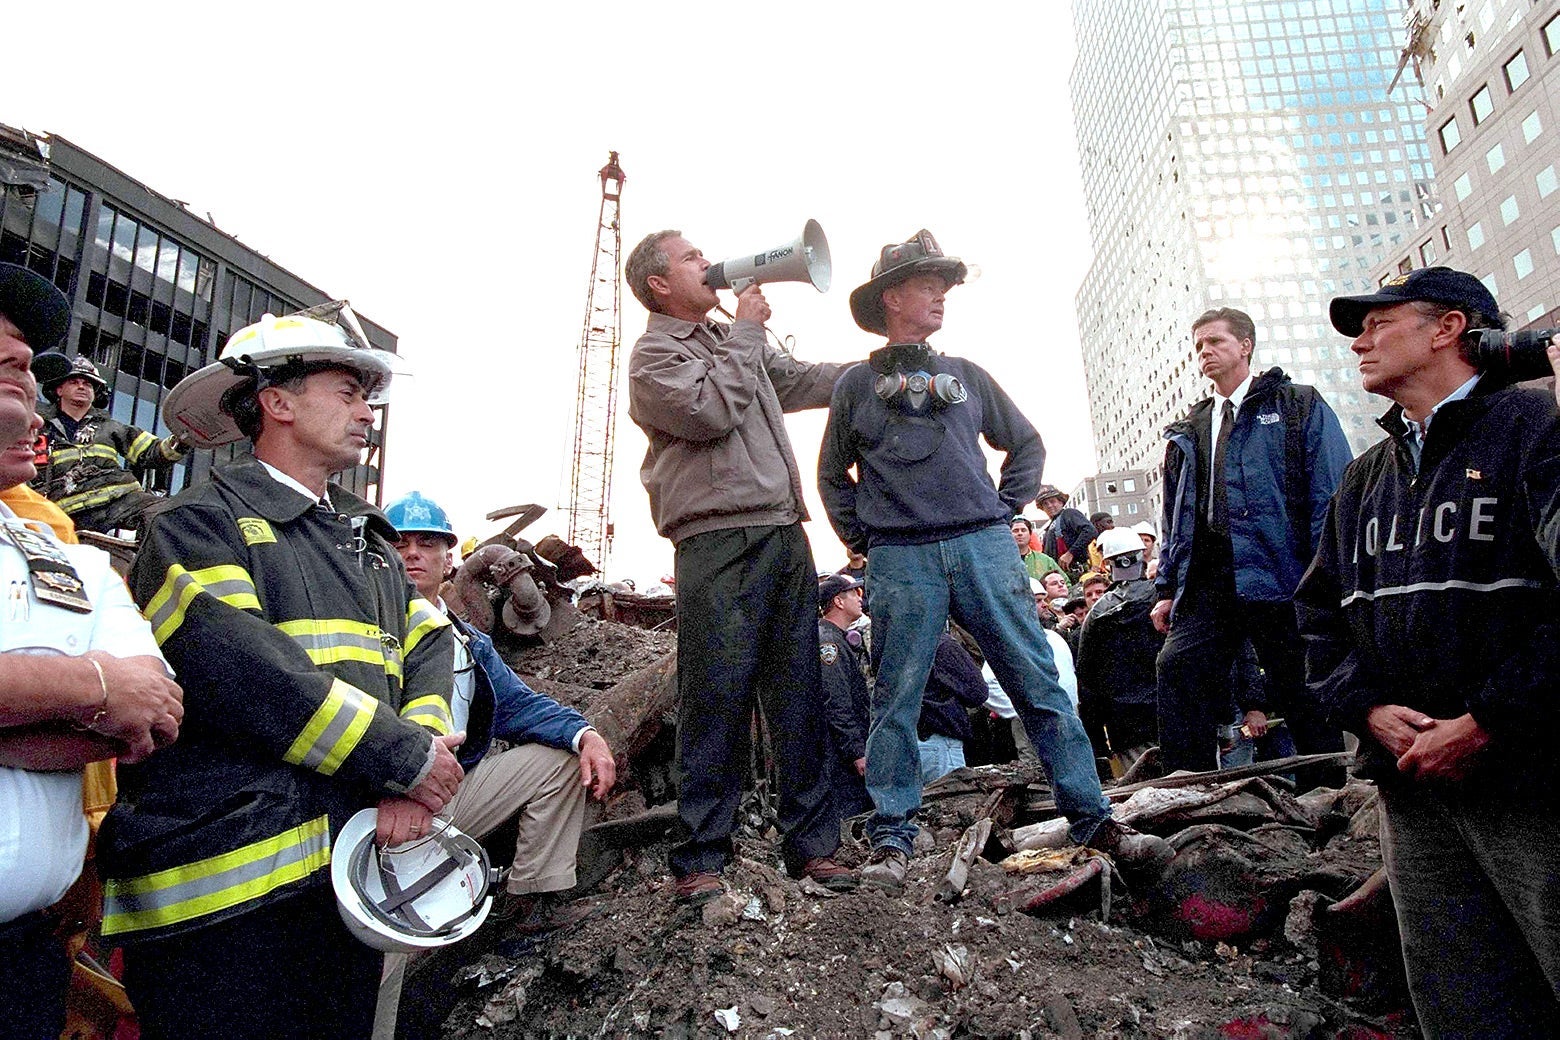 Bush uses a bullhorn as he stands on rubble surrounded by rescue workers, firefighters, and police.